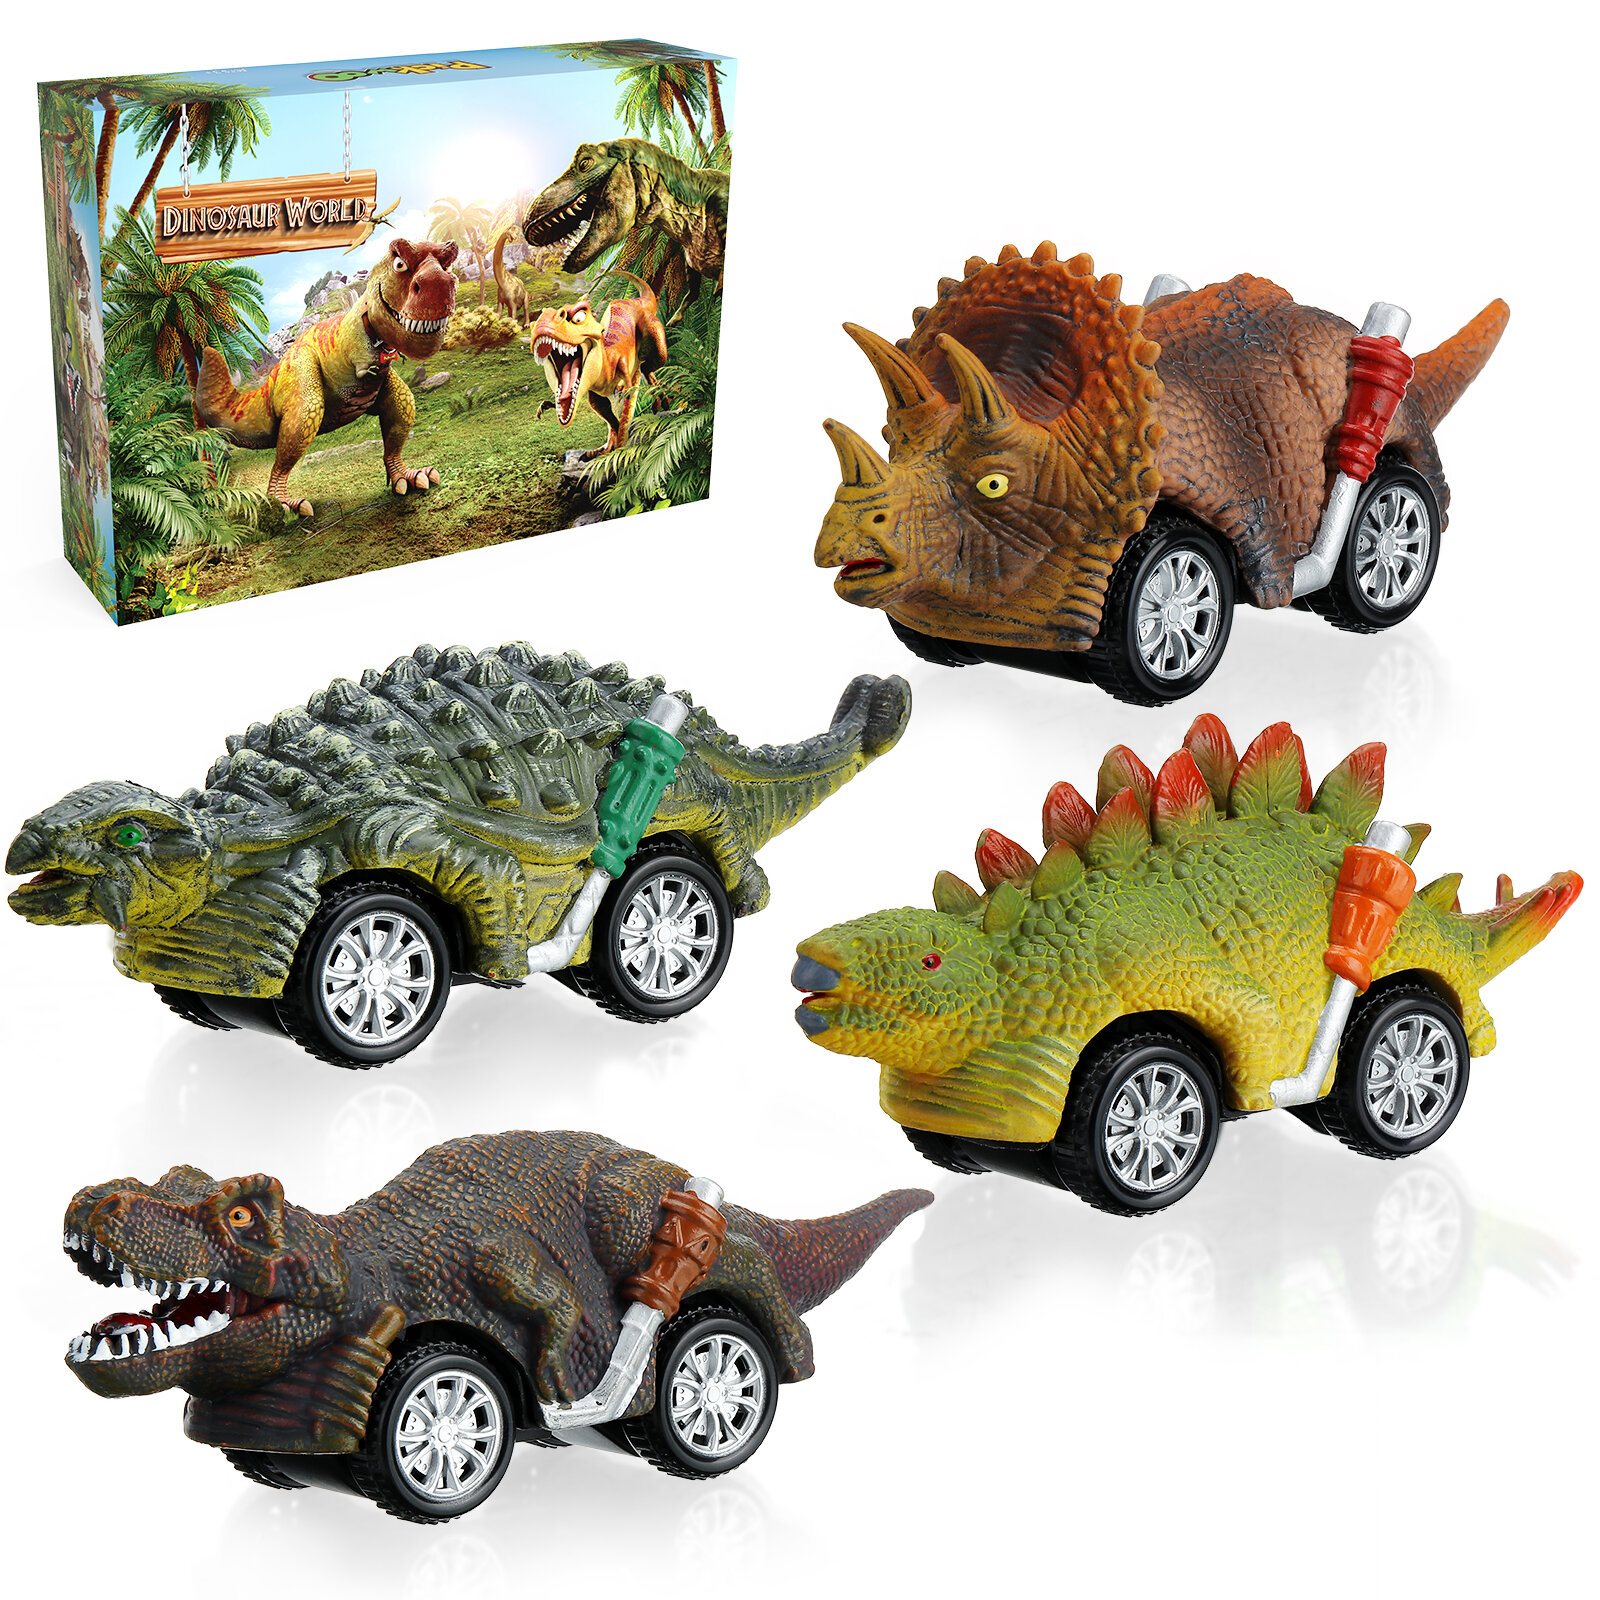 Pickwoo Dinosaur Toys Cars Inertia Vehicles Toddlers Kids Dinosaur Party Games with T-Rex Dino Toys 